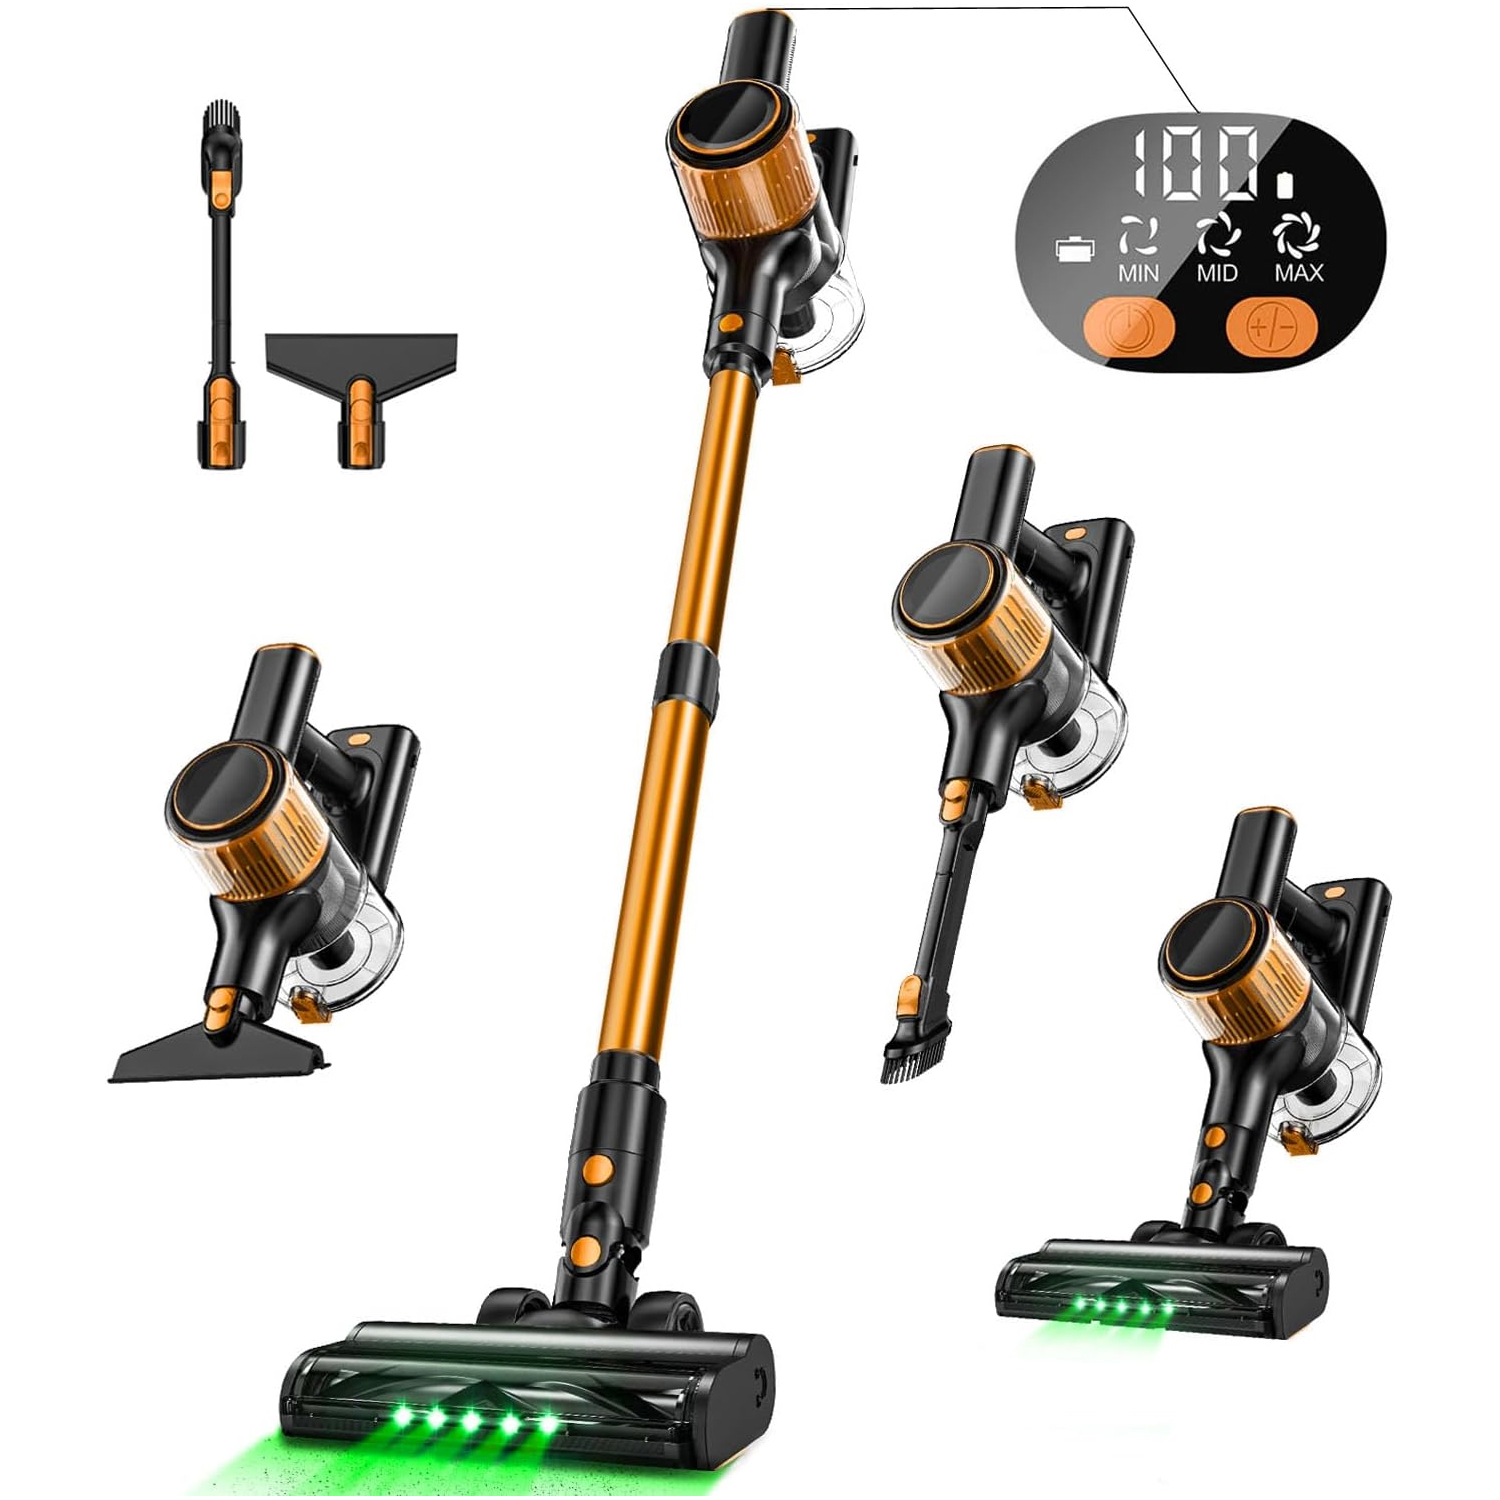 

Cordless Vacuum Cleaner, 30kpa Powerful Suction 8 In 1 Stick Vacuum With Led Display, 3 Modes Suction, Anti-tangle & Dust Cup, Lightweight Vacuum For Hardwood Floor/carpet/pet Hair, Orange